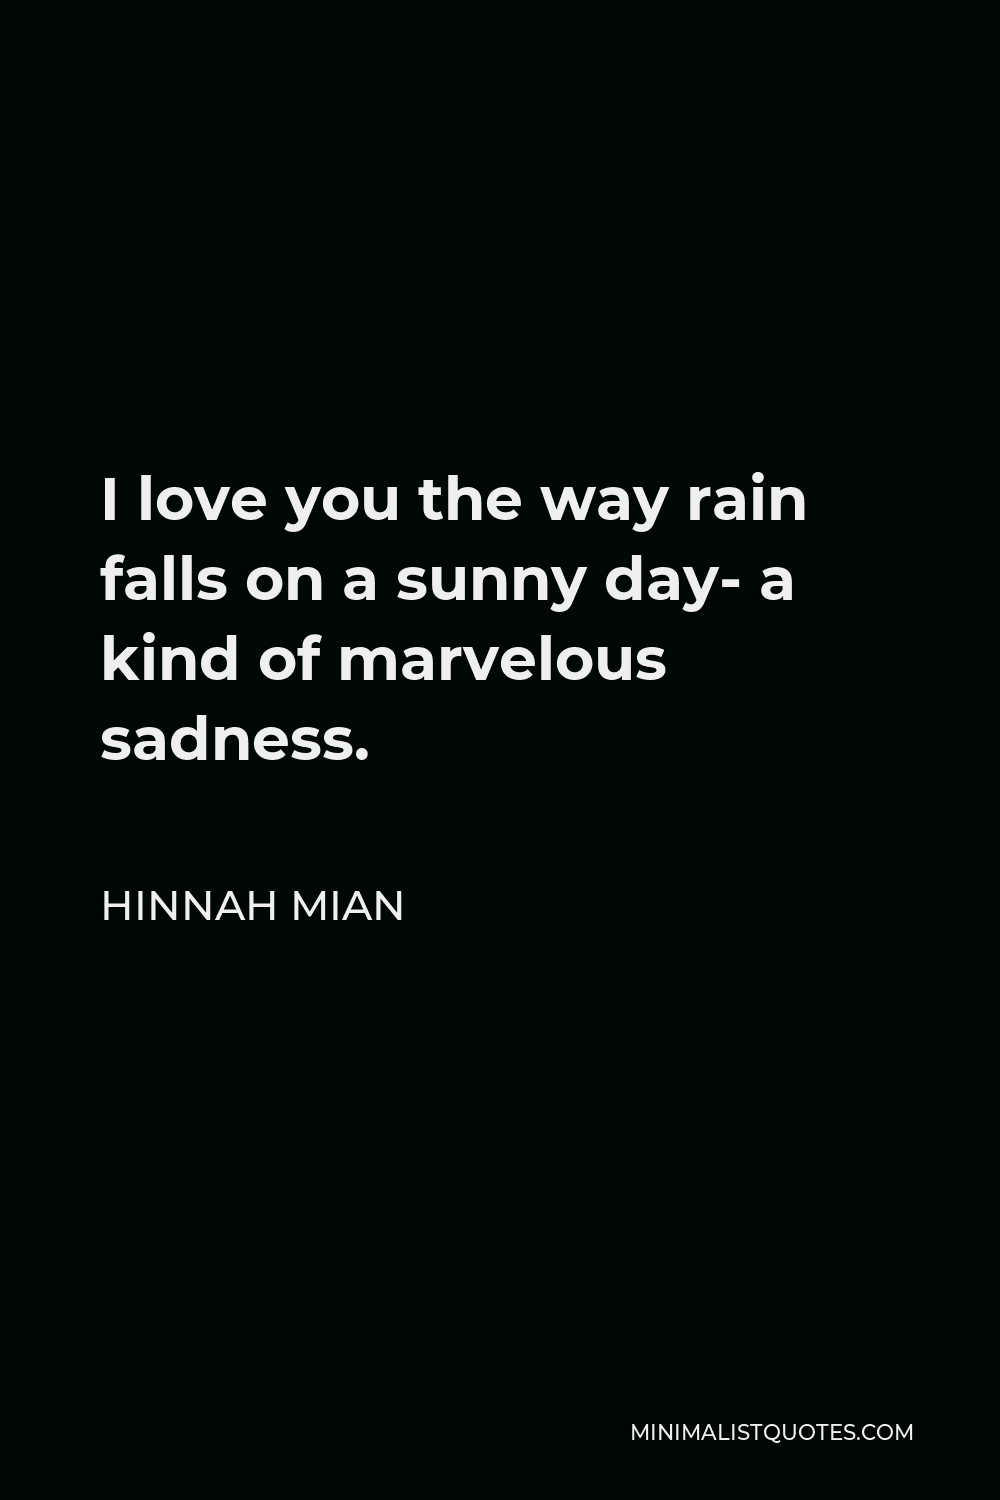 Hinnah Mian Quote - I love you the way rain falls on a sunny day- a kind of marvelous sadness.